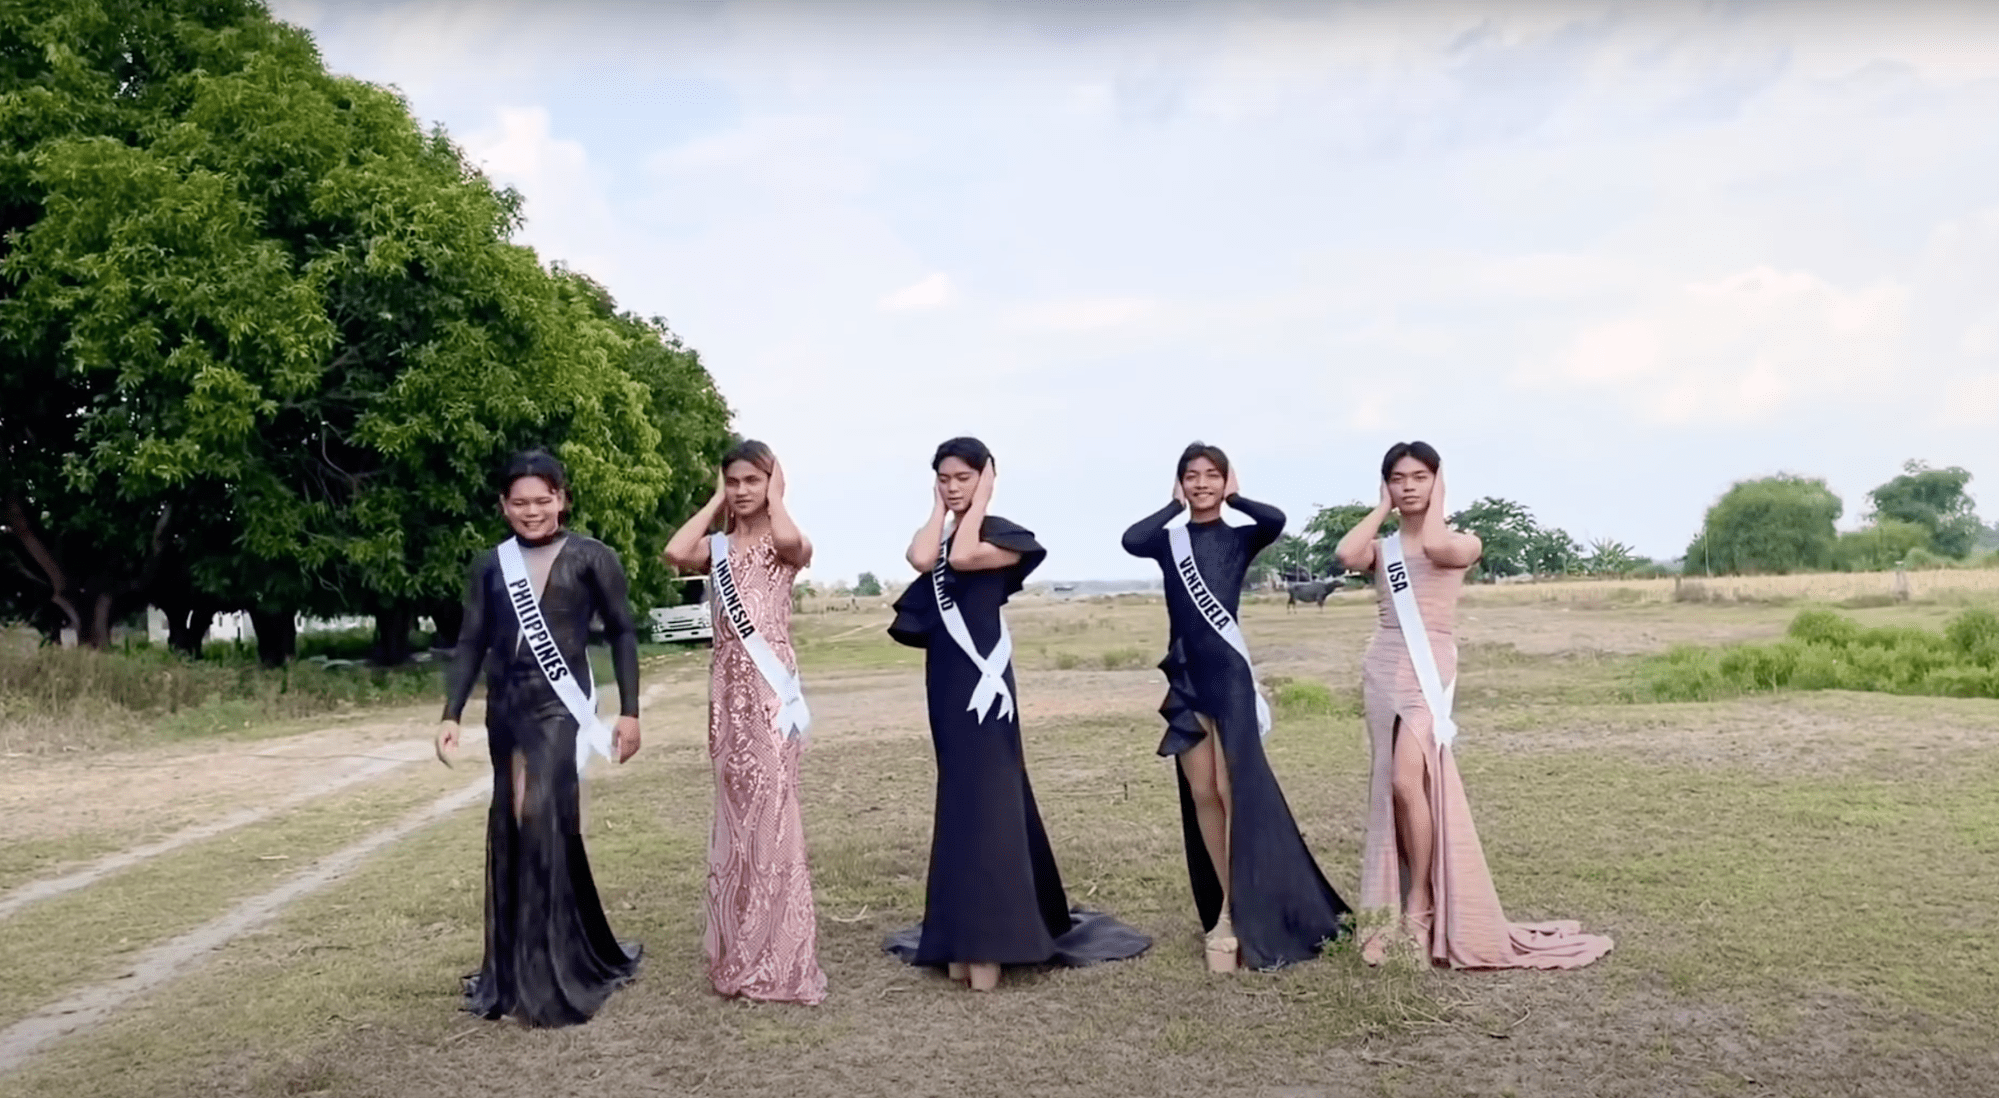 5 Filipinos in evening gowns, 4 covering their ears